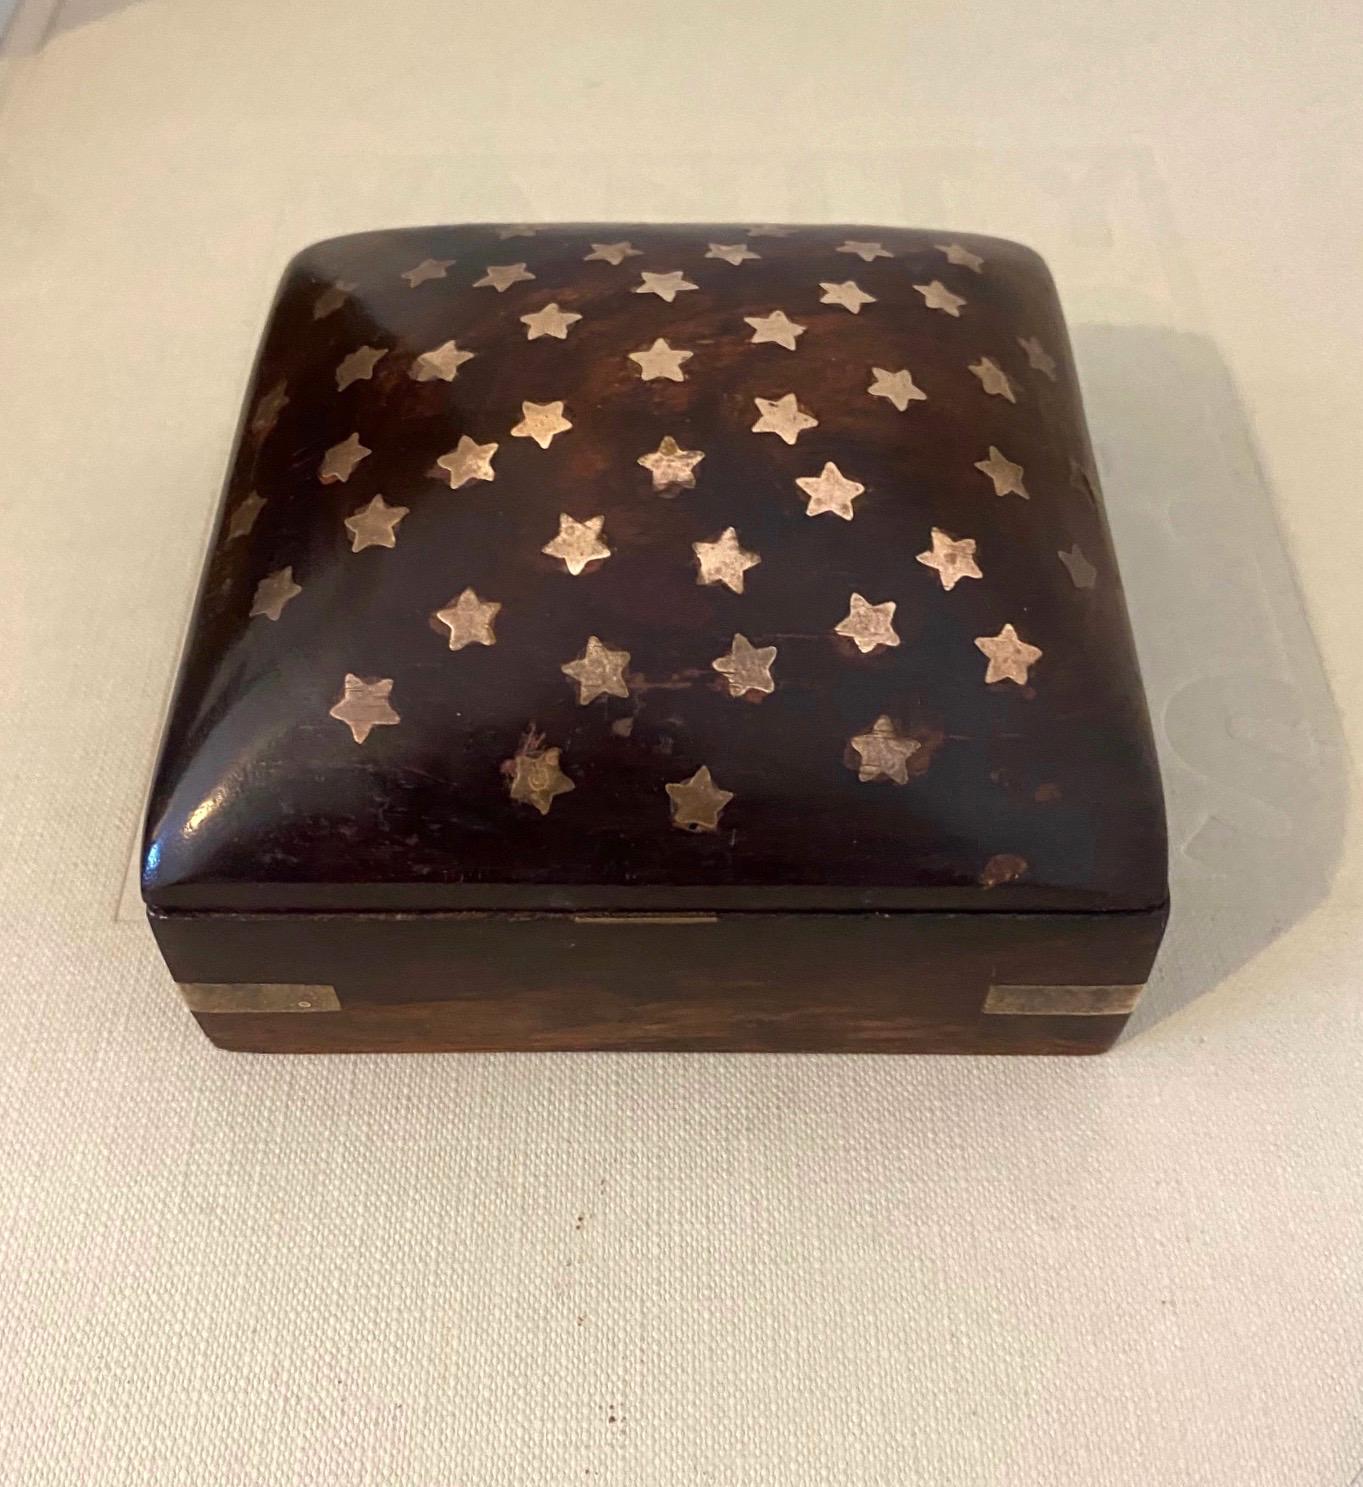 Mid-Century Modern handmade trinket box in rosewood. The box has a square form with a dome top. The lid features beautiful brass star inlays and the corners have brass metal accents. The brass exhibits some patina which only adds to the allure and